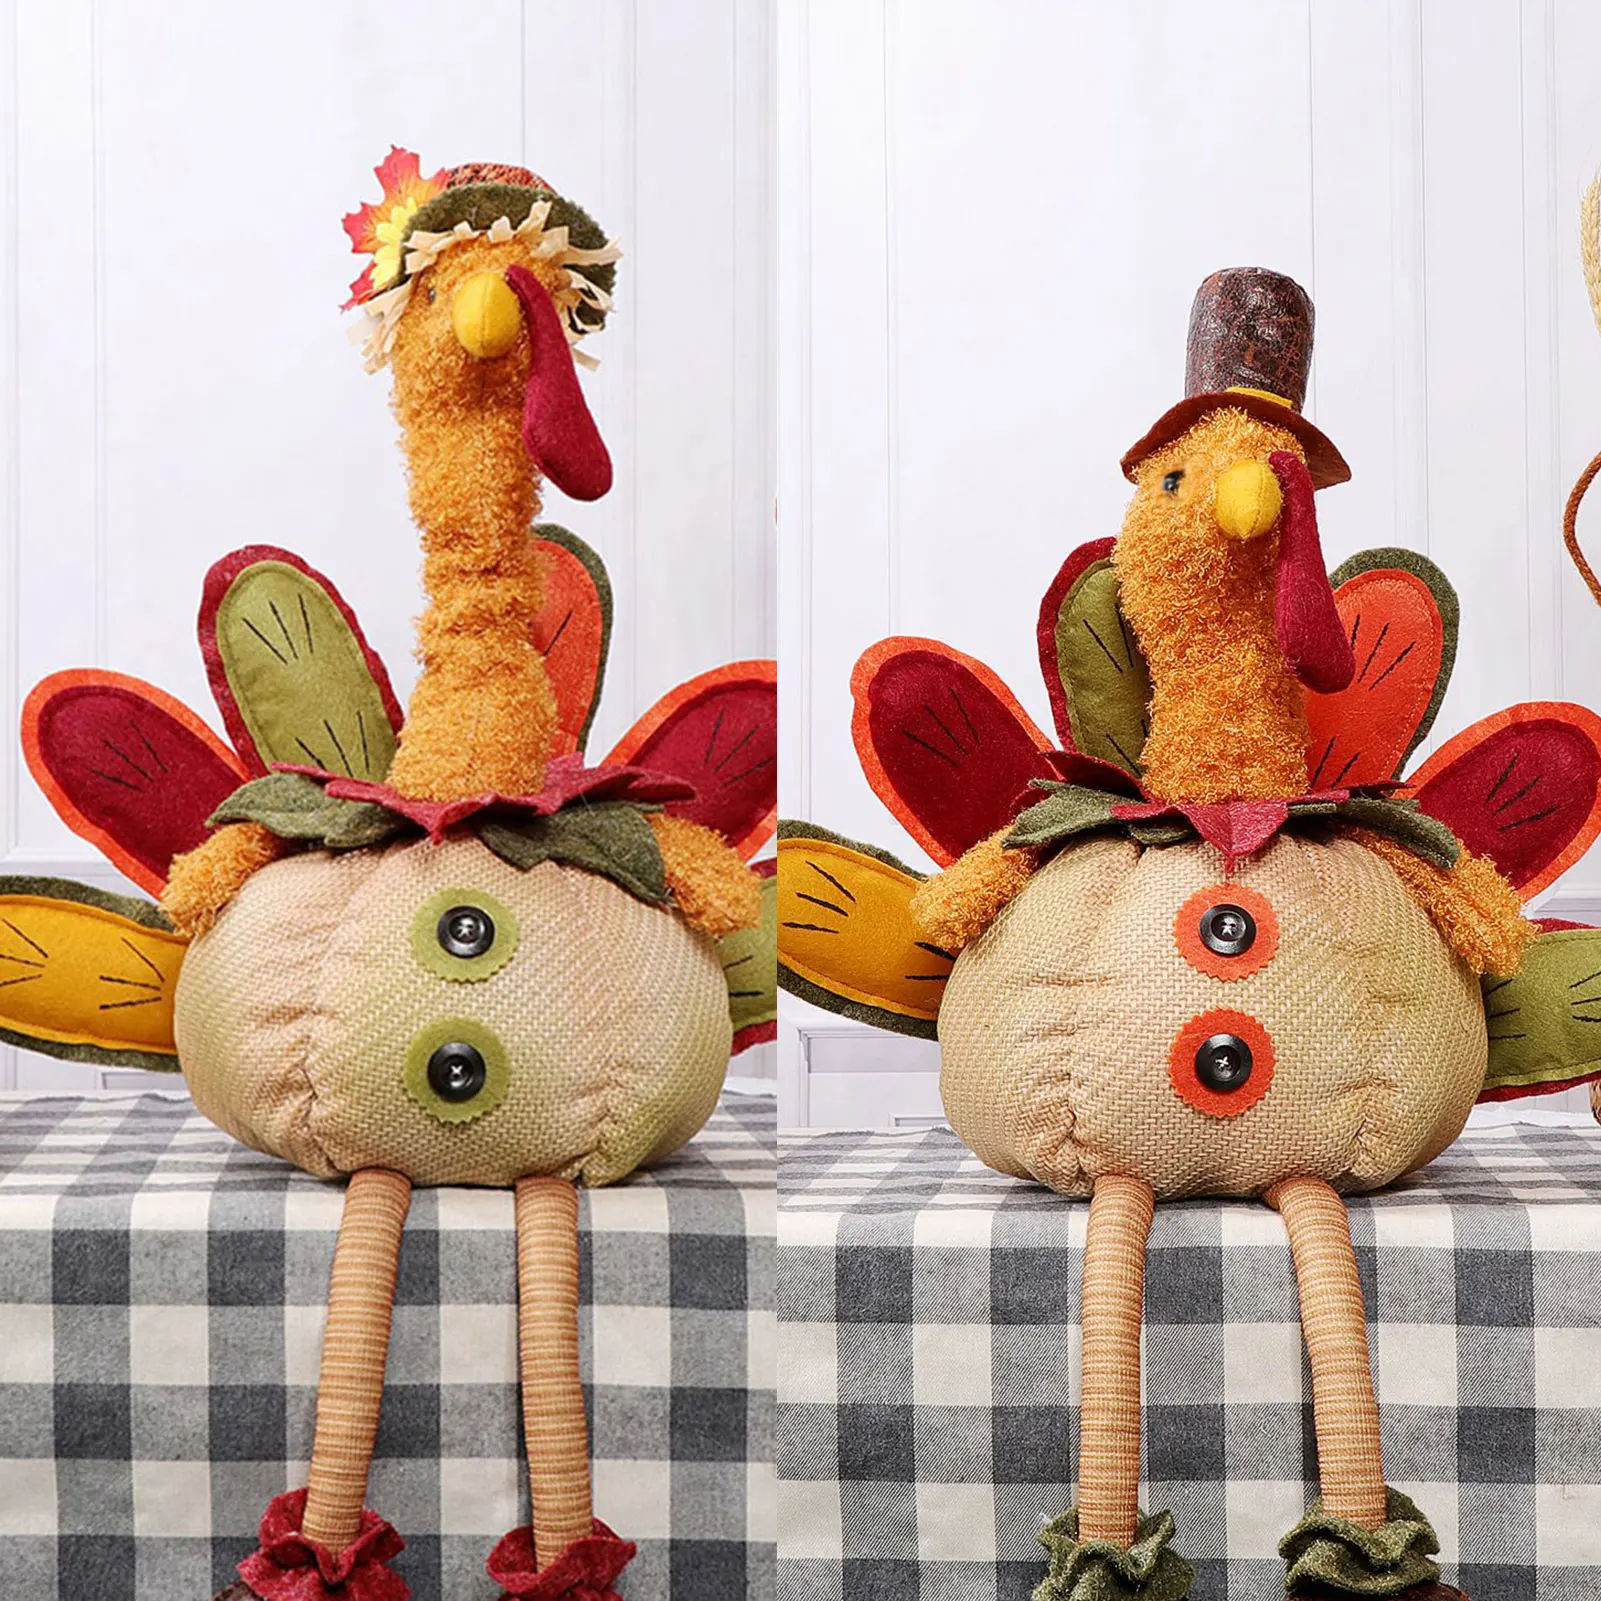 

Turkeys Figurines For Fall Decor Colorful Party Decor Props For Fall Festival